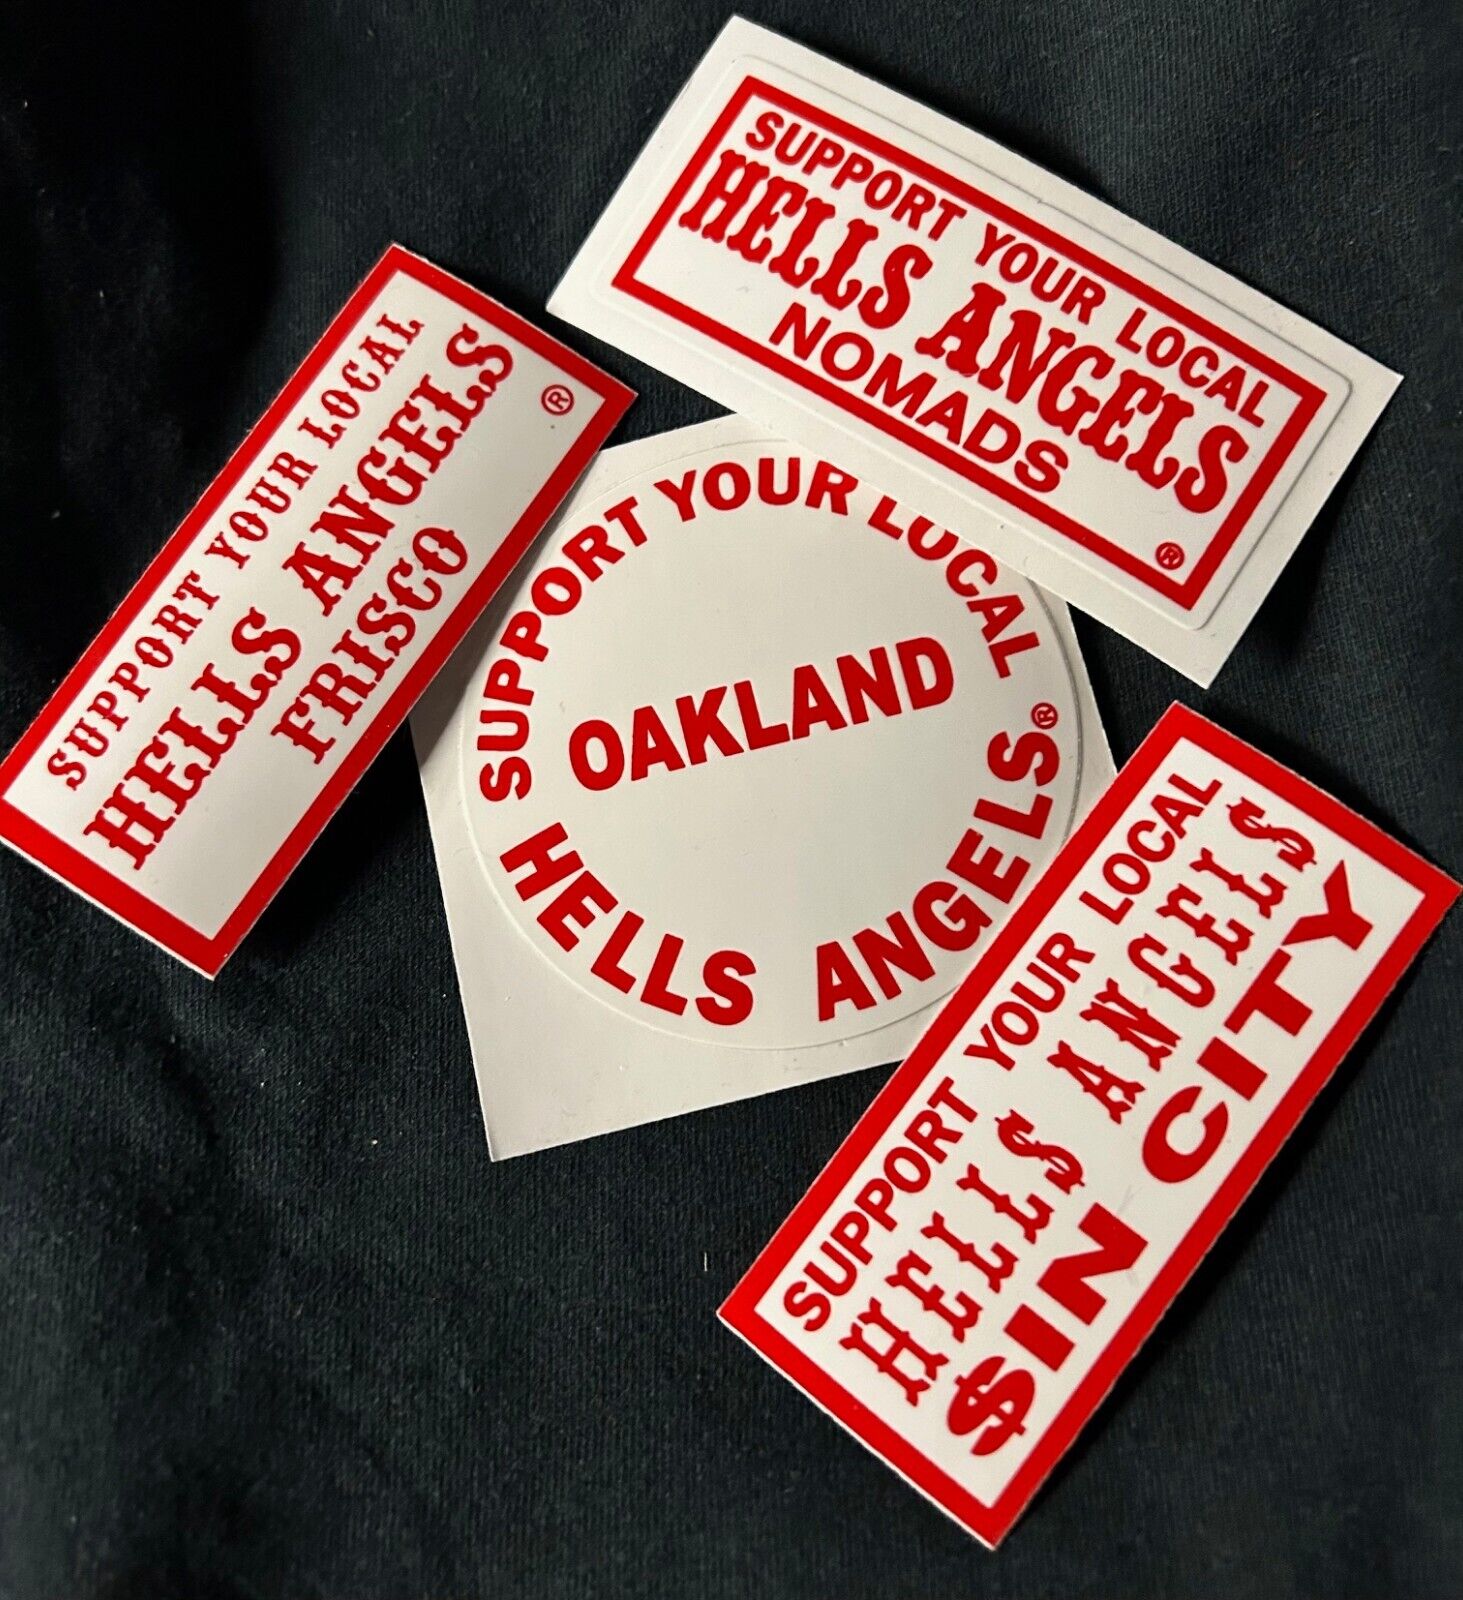 RARE NOS HELLS ANGELS SUPPORT STICKERS FOR PRIVATE COLLECTIONS ONLY